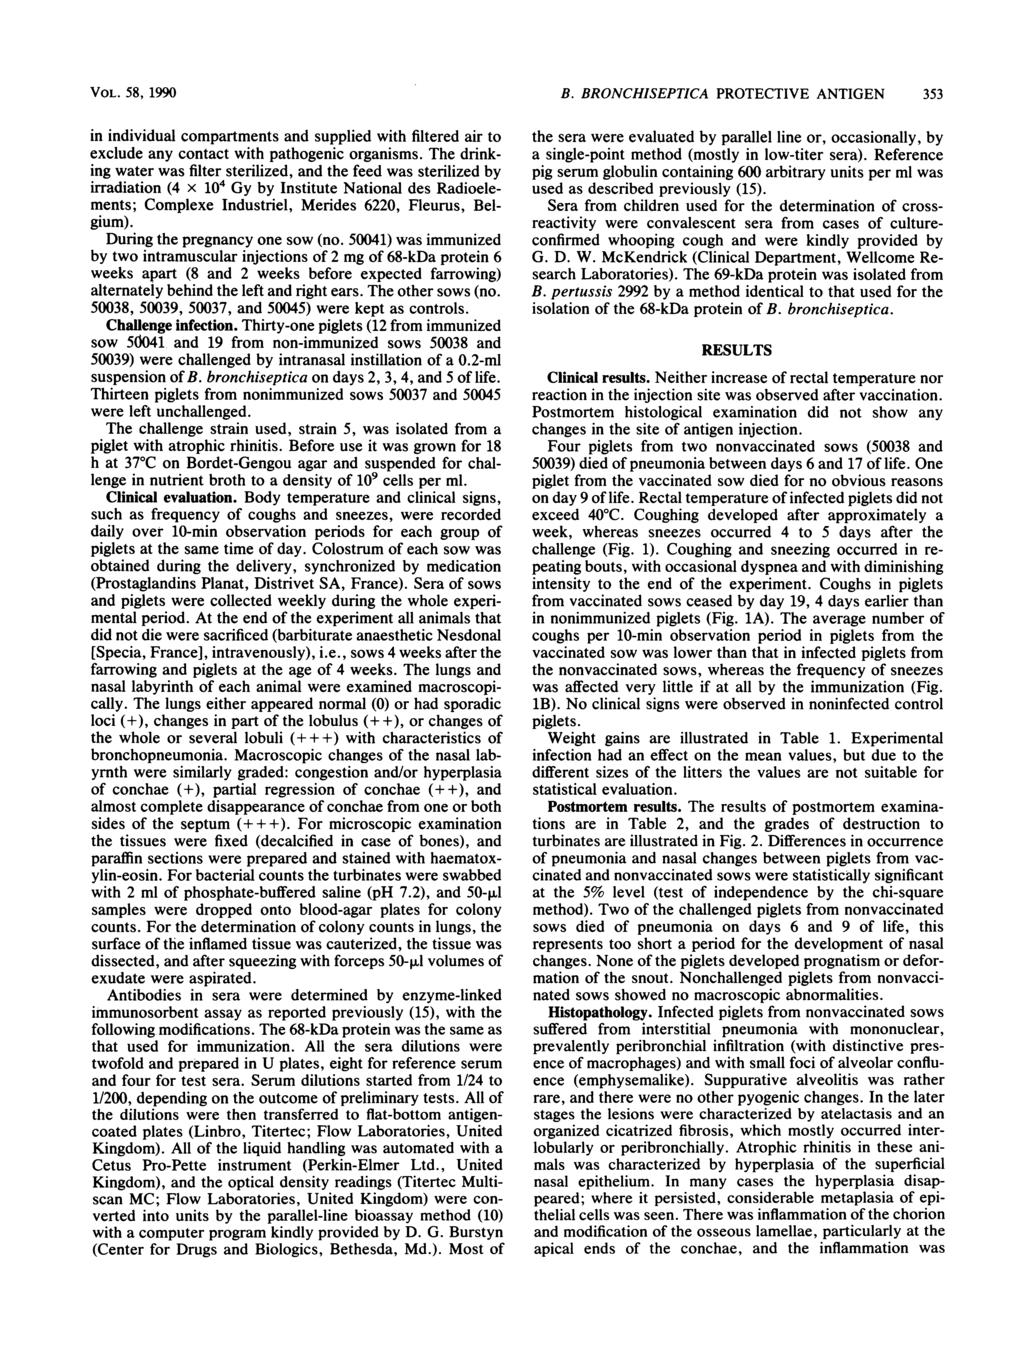 VOL. 58, 199 in individual compartments and supplied with filtered air to exclude any contact with pathogenic organisms.